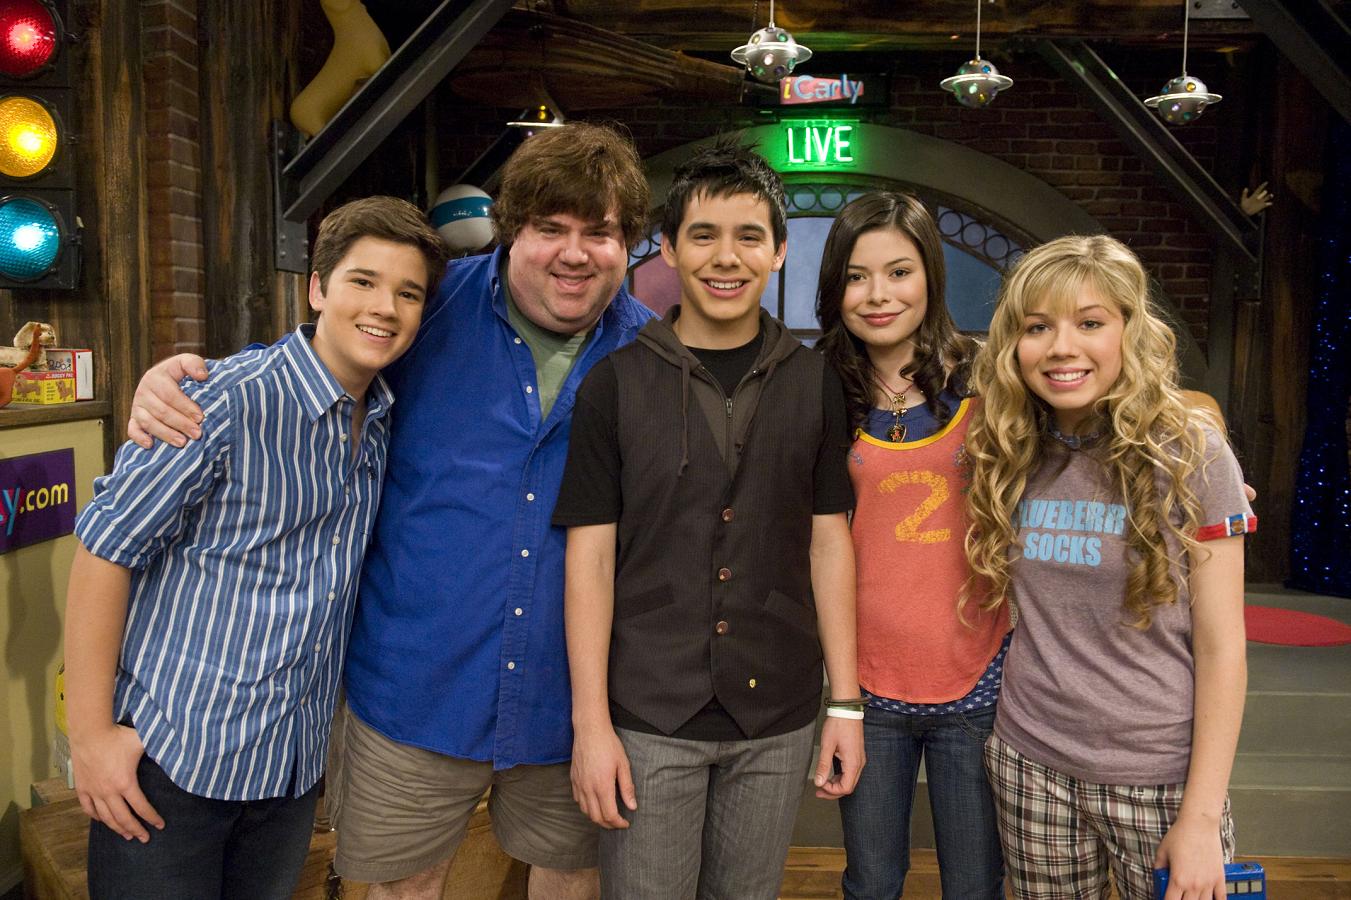 ICarly characters.